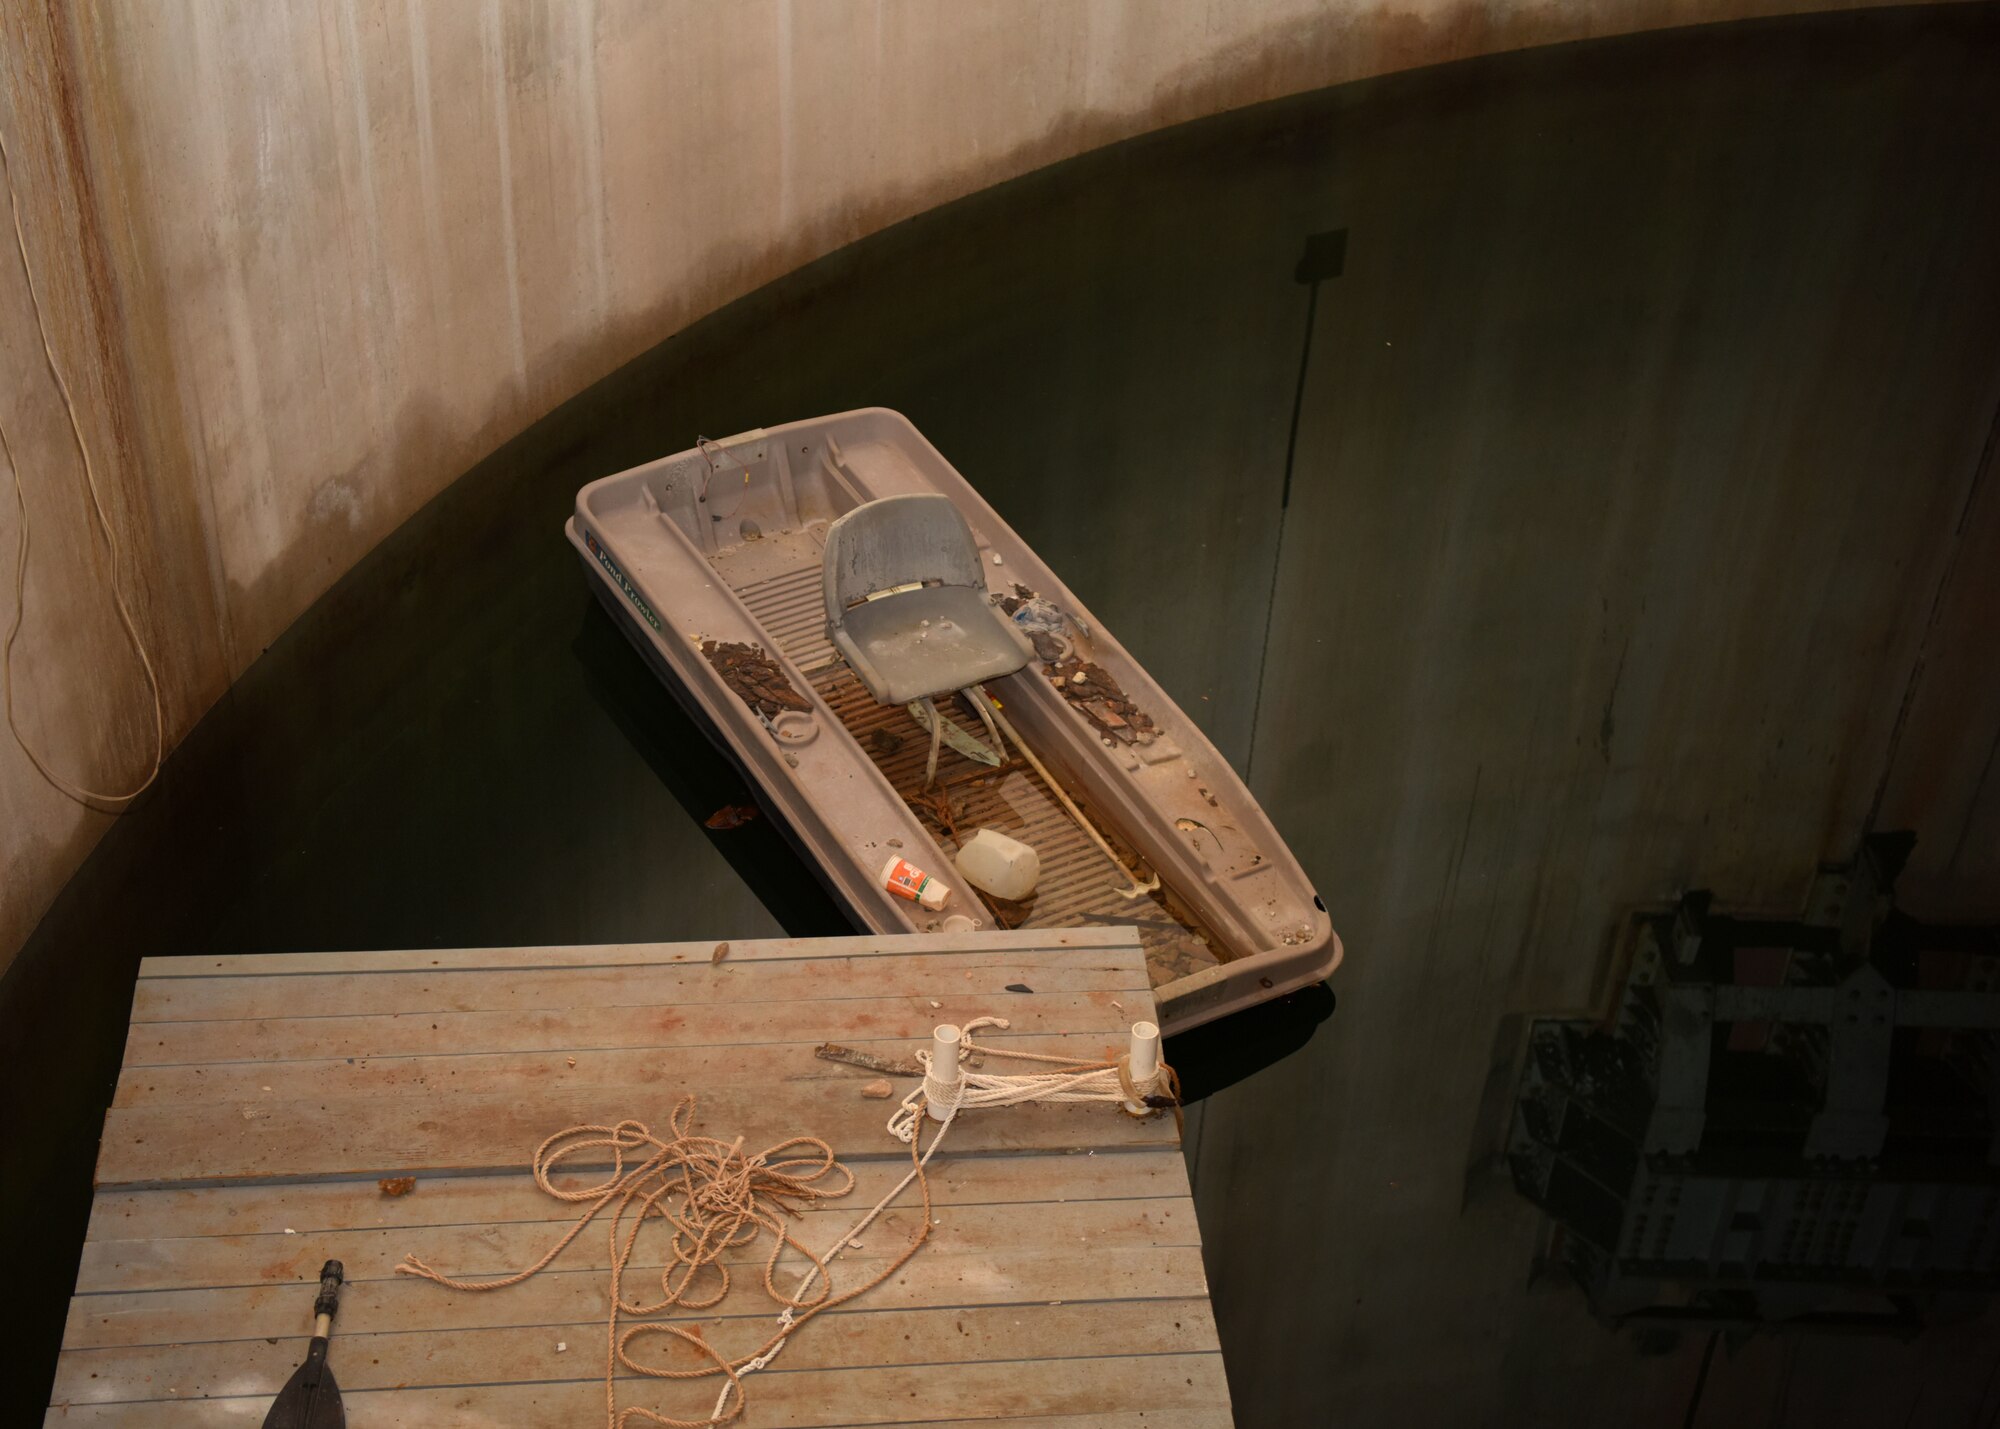 Owner of the Lawn Atlas Missile Base, Larry Sanders’ boat sits in the flooded missile silo at the LAMB in Lawn, Texas, Oct. 26, 2020. Sanders scuba dives into the silo with an experienced team to explore the silo and restore it. (U.S. Air Force photo by Airman 1st Class Ethan Sherwood)